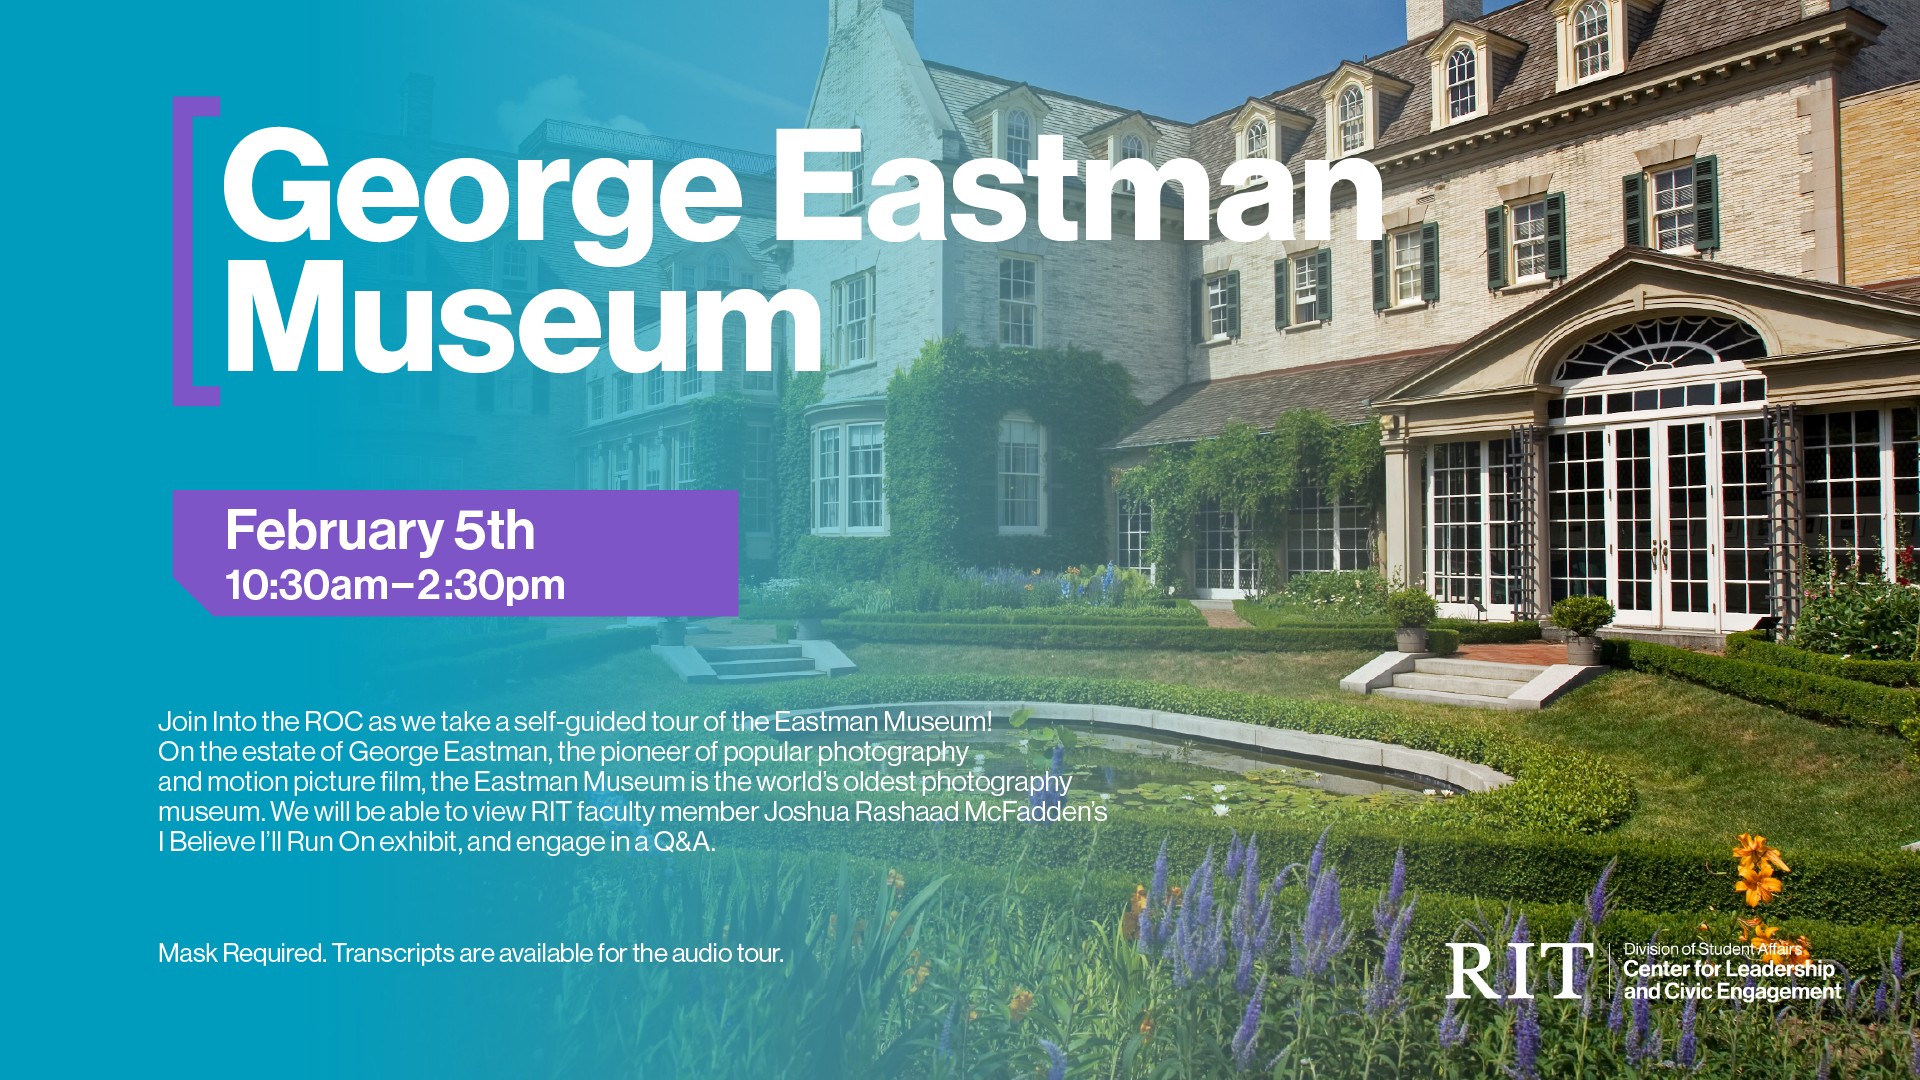 To the right of the image, a picture of the George Eastman Mansion during a warm summer day. To the left of the image, written in white text over a blue background, are the details of the event. 